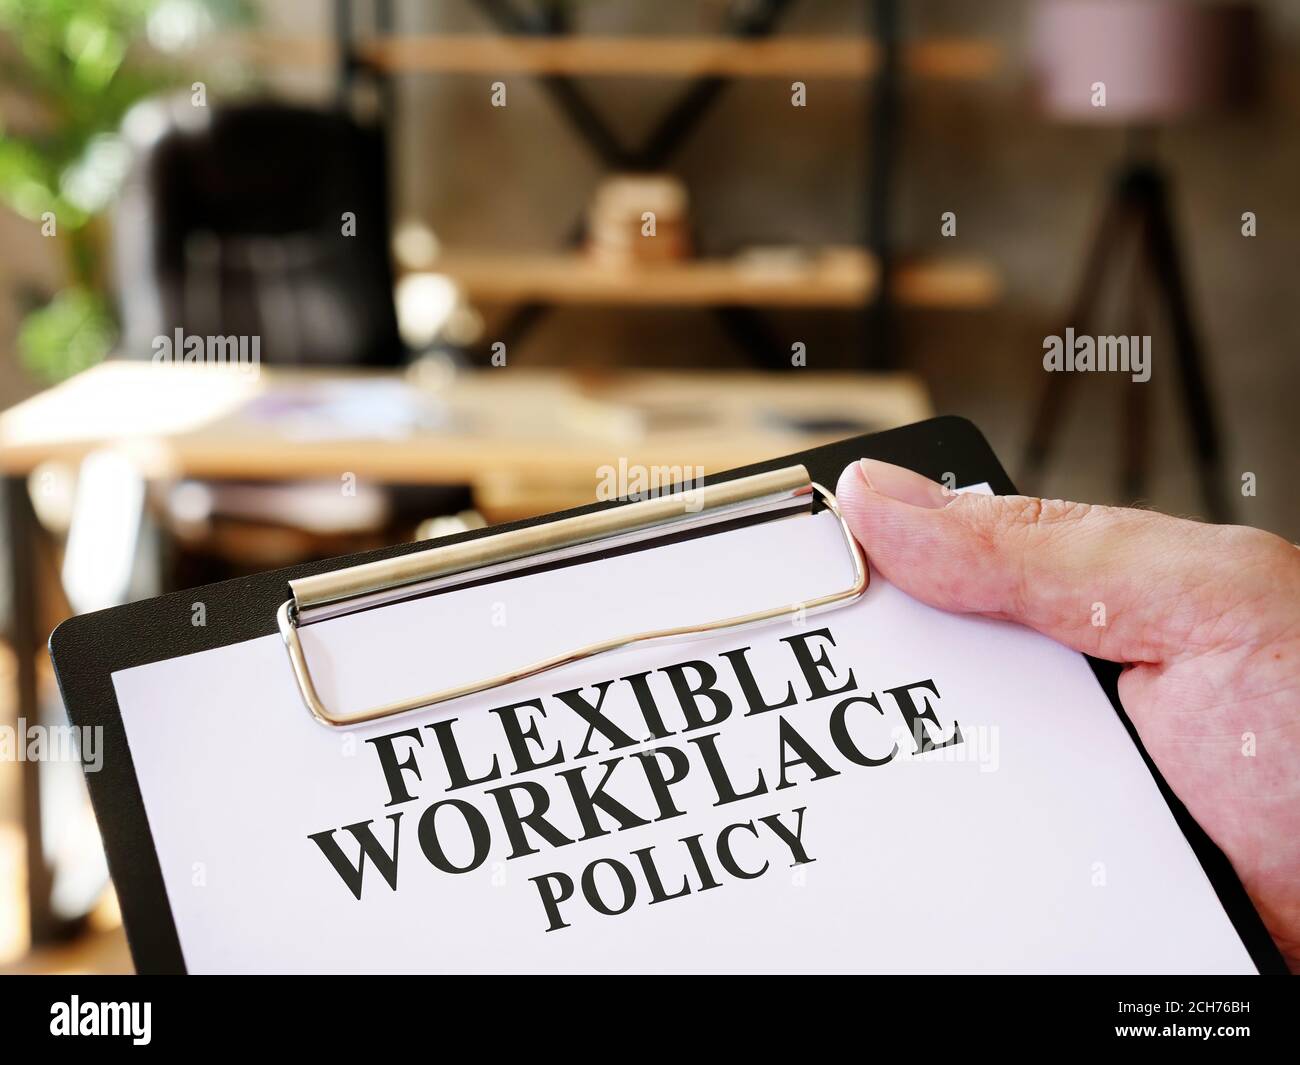 The manager is reading Flexible workplace policy in the office. Stock Photo